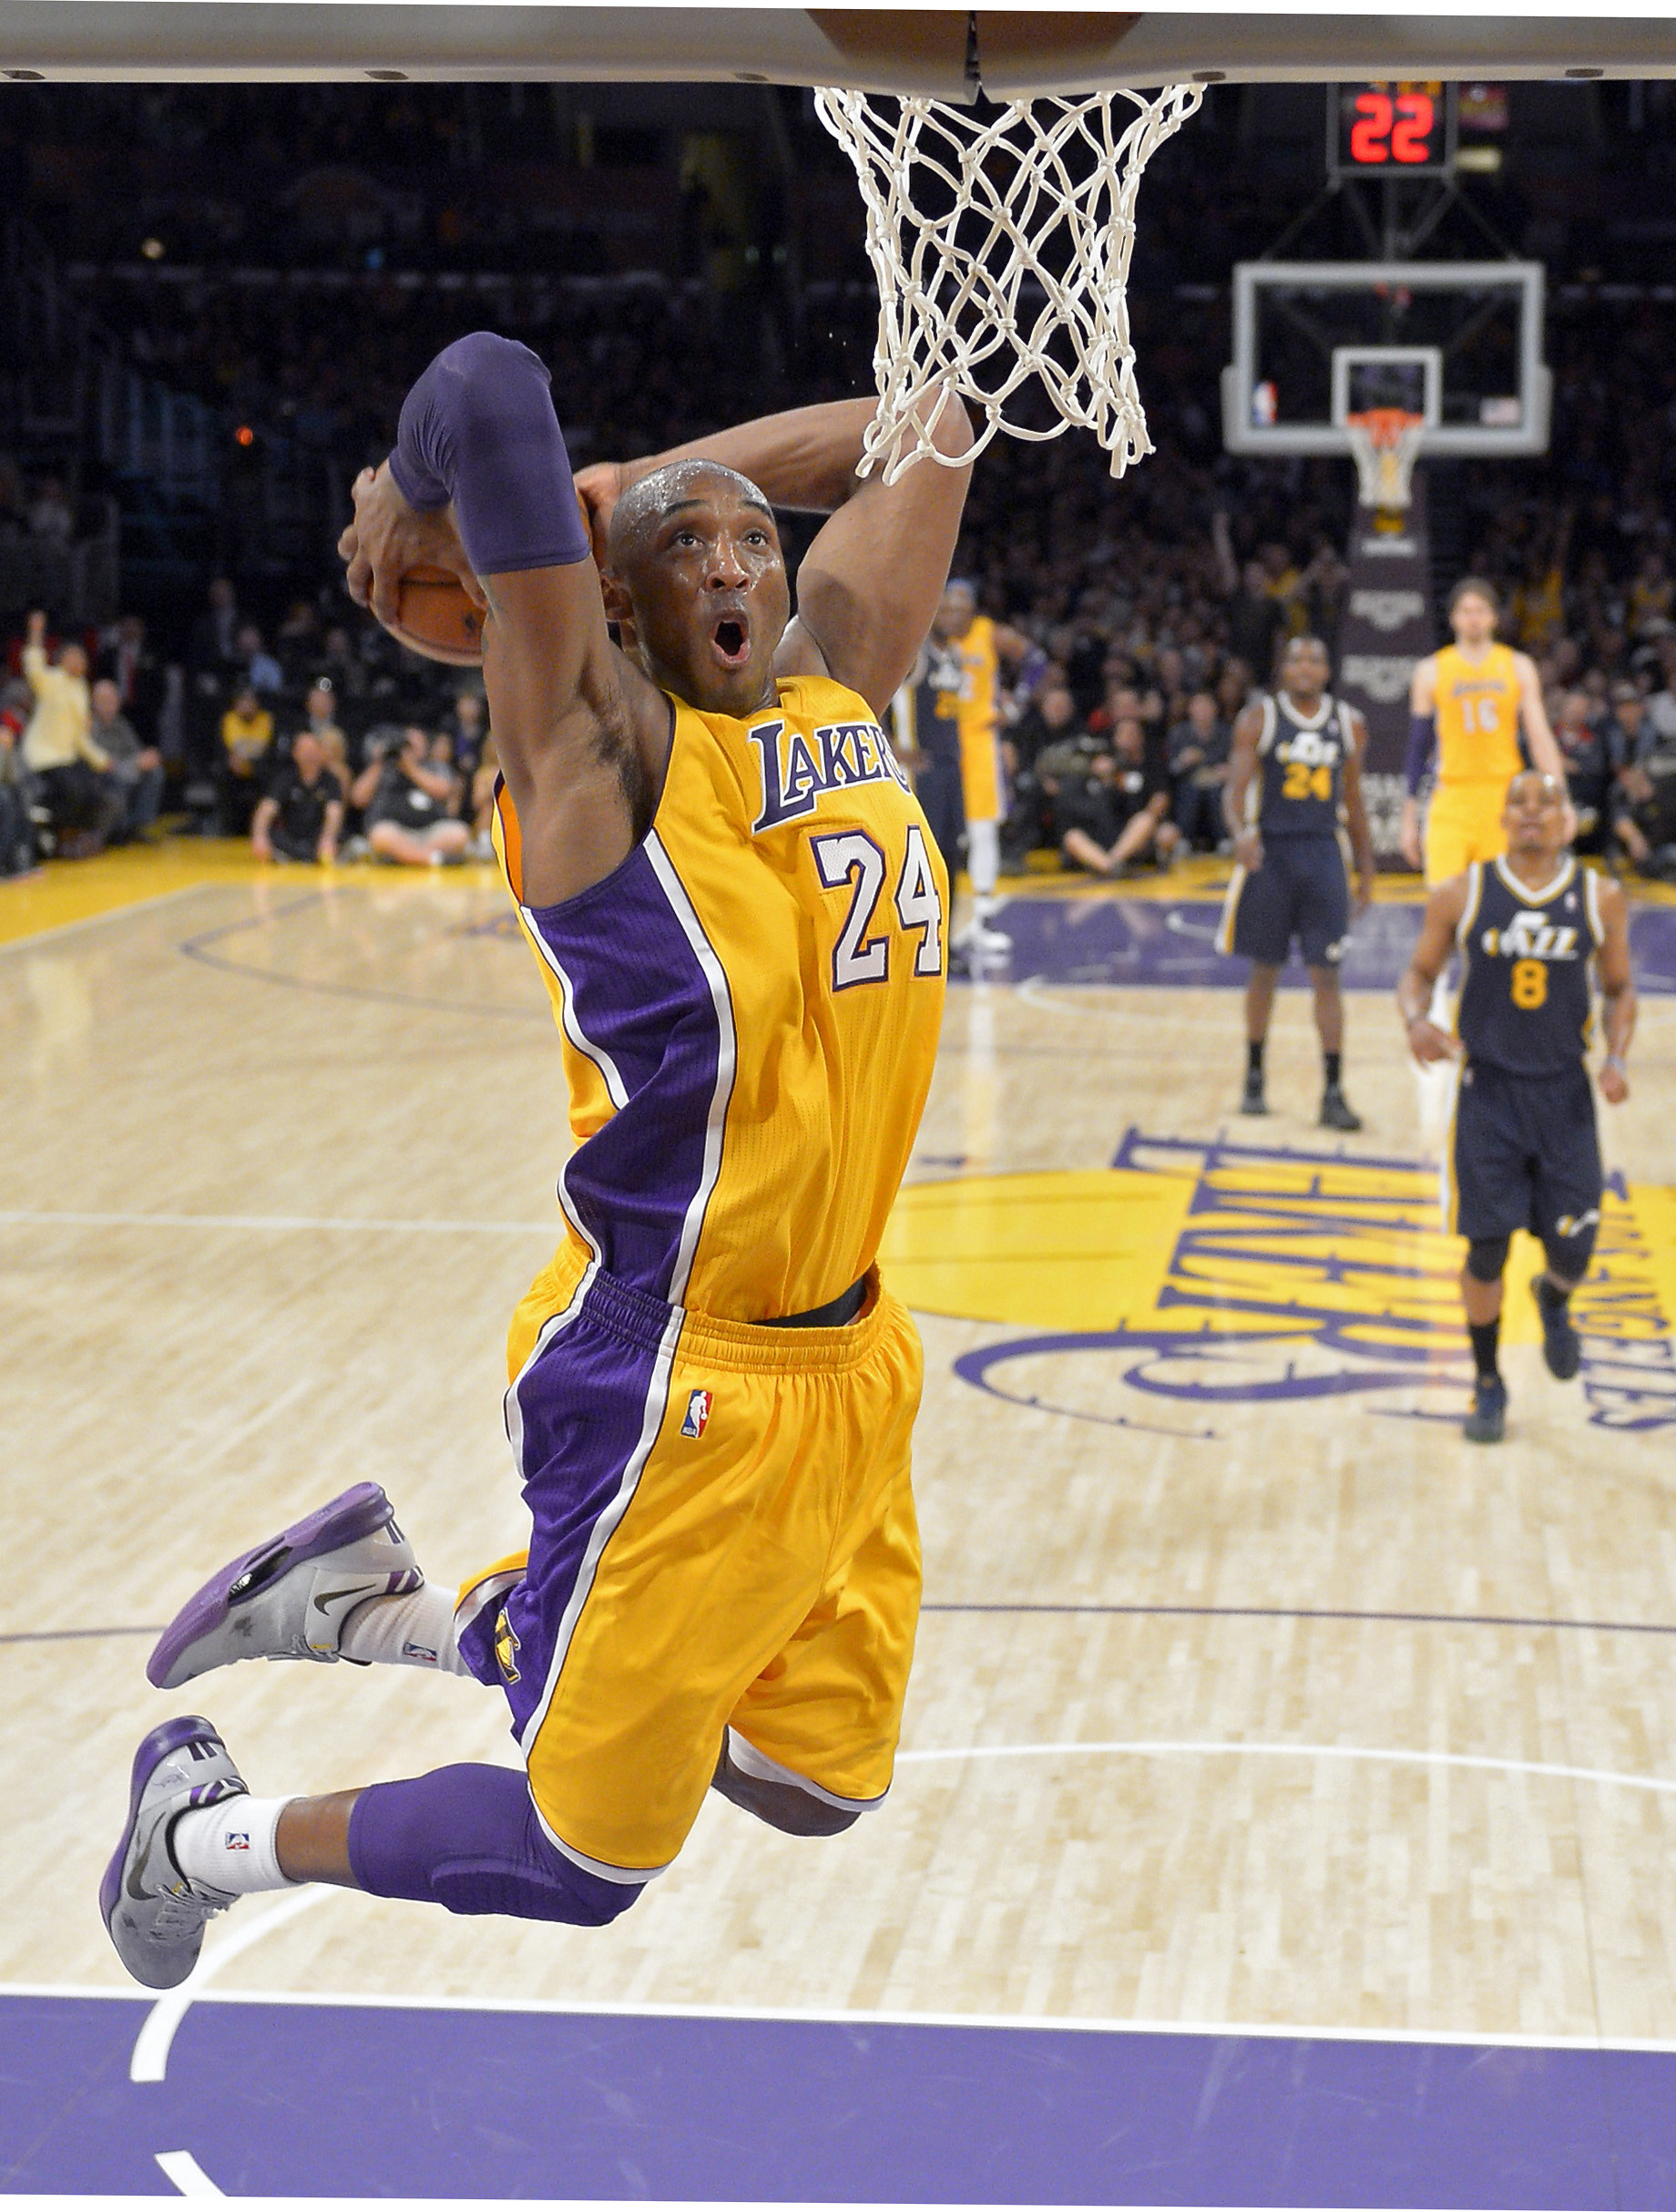 Sporty and Inspiring Kobe Bryant Wallpapers and Backgrounds for Free  AMJ